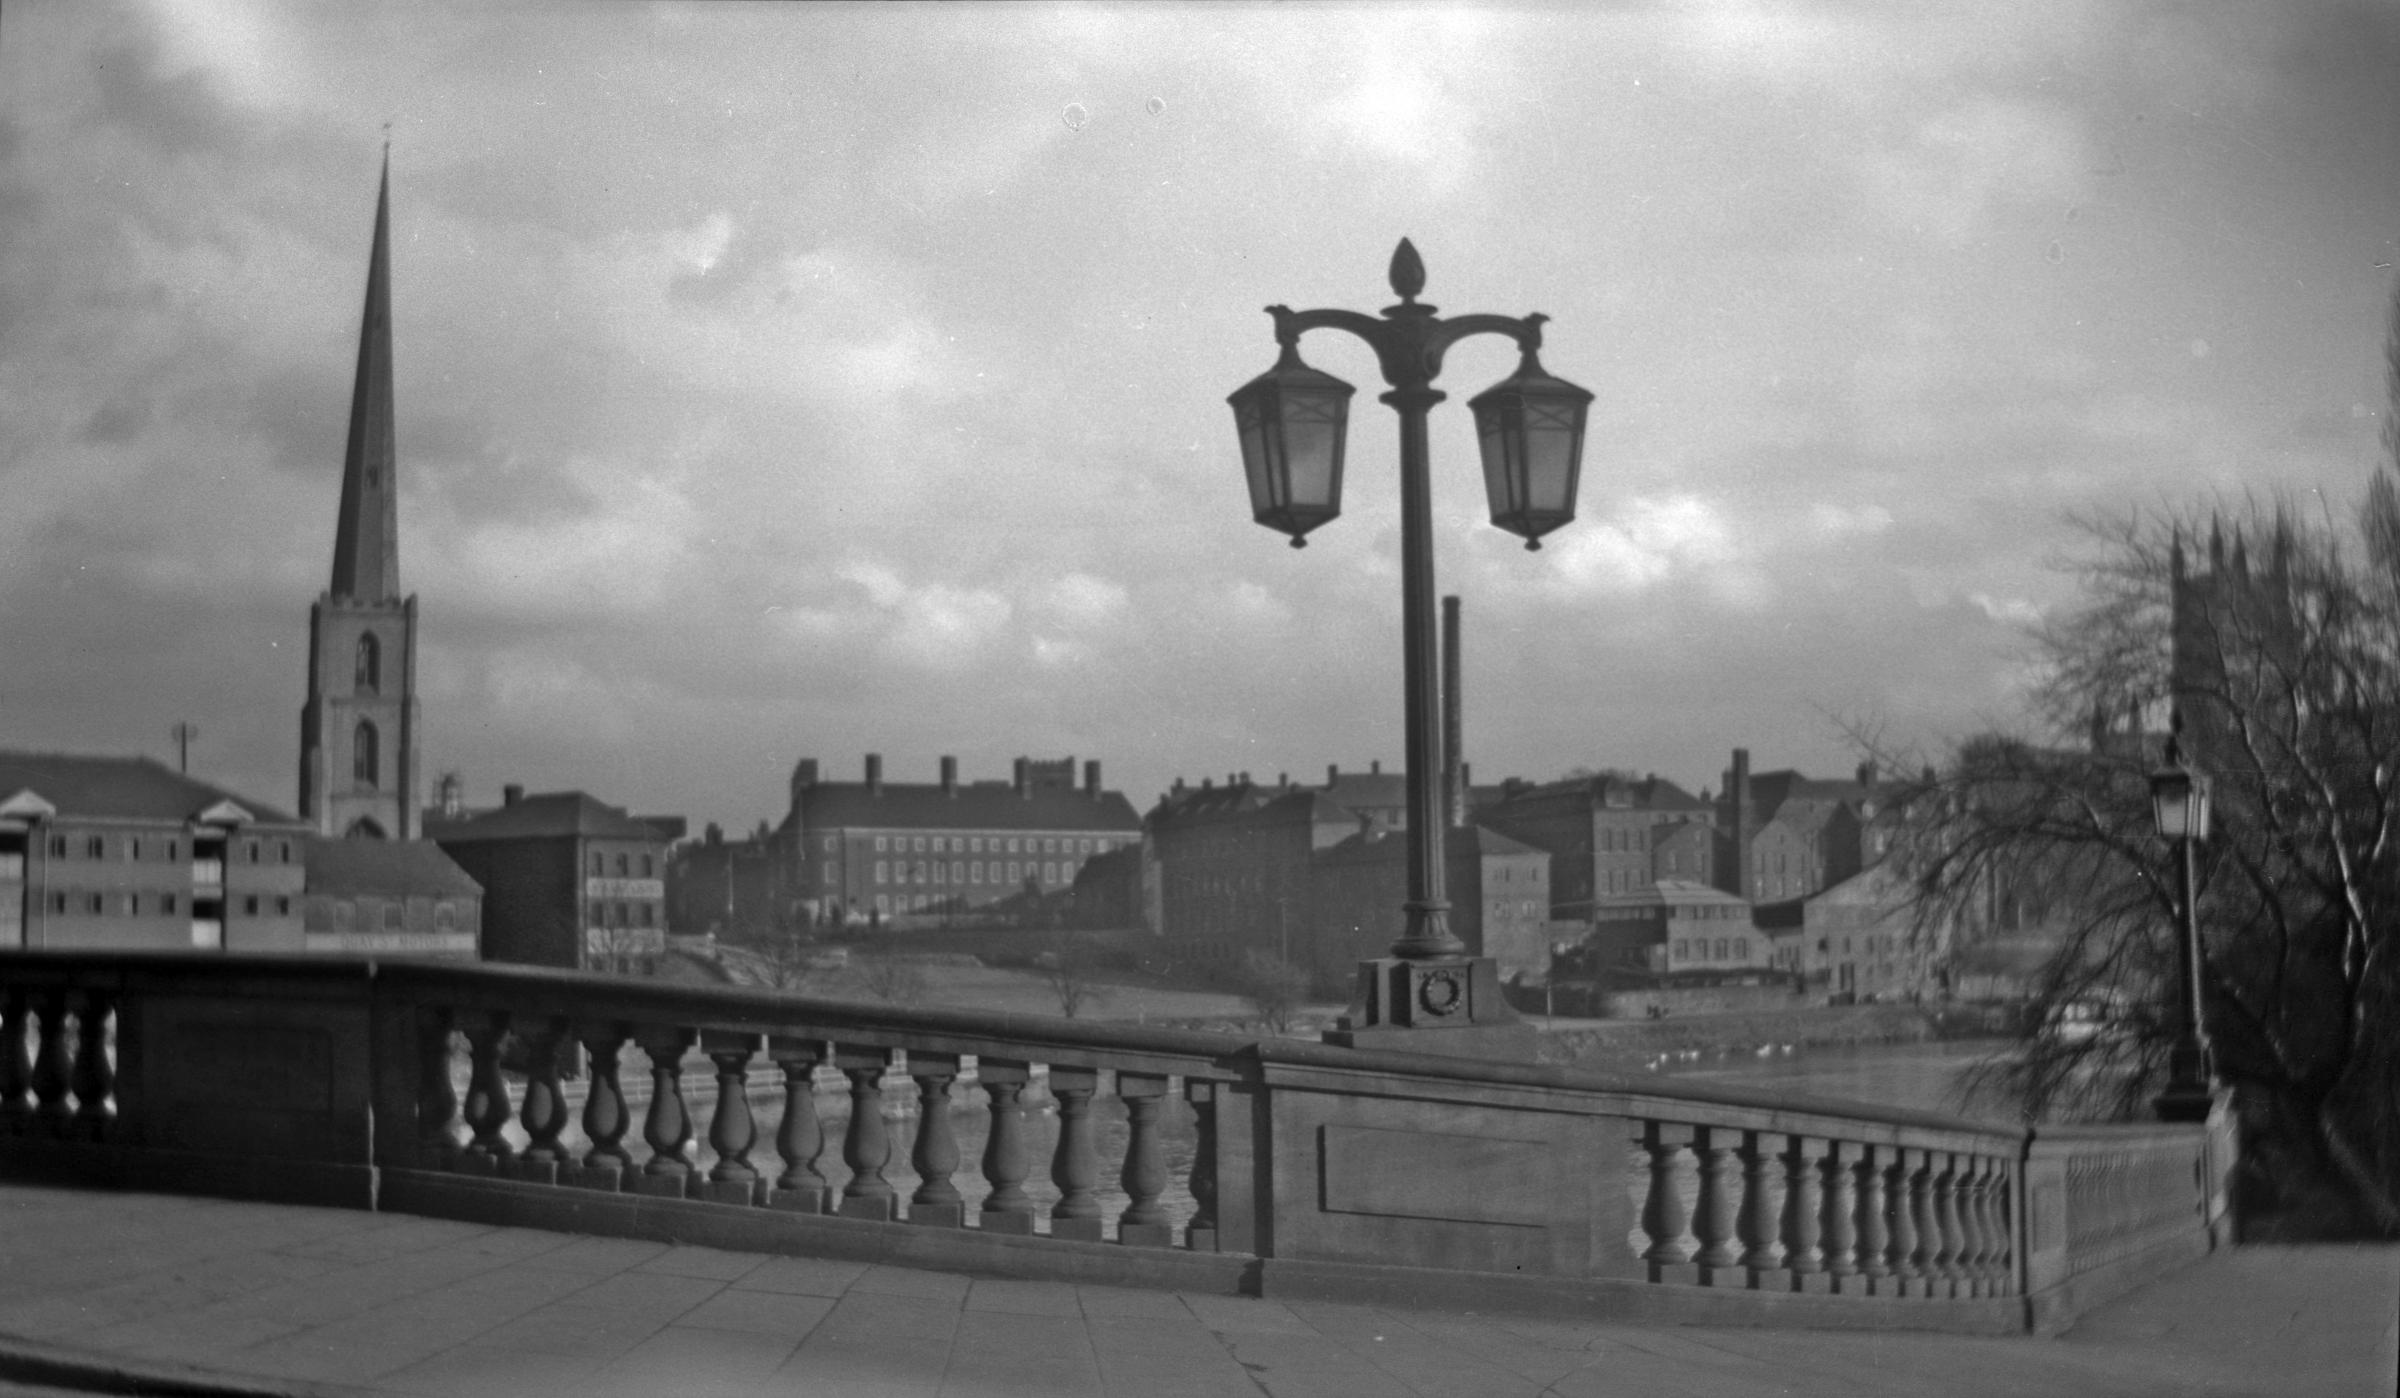 Worcester Bridge in the 1950s, complete with Hardy and Padmore Lamp Standards. In the background can be seen the former Dents Glove Factory premises, on the bank of the Severn